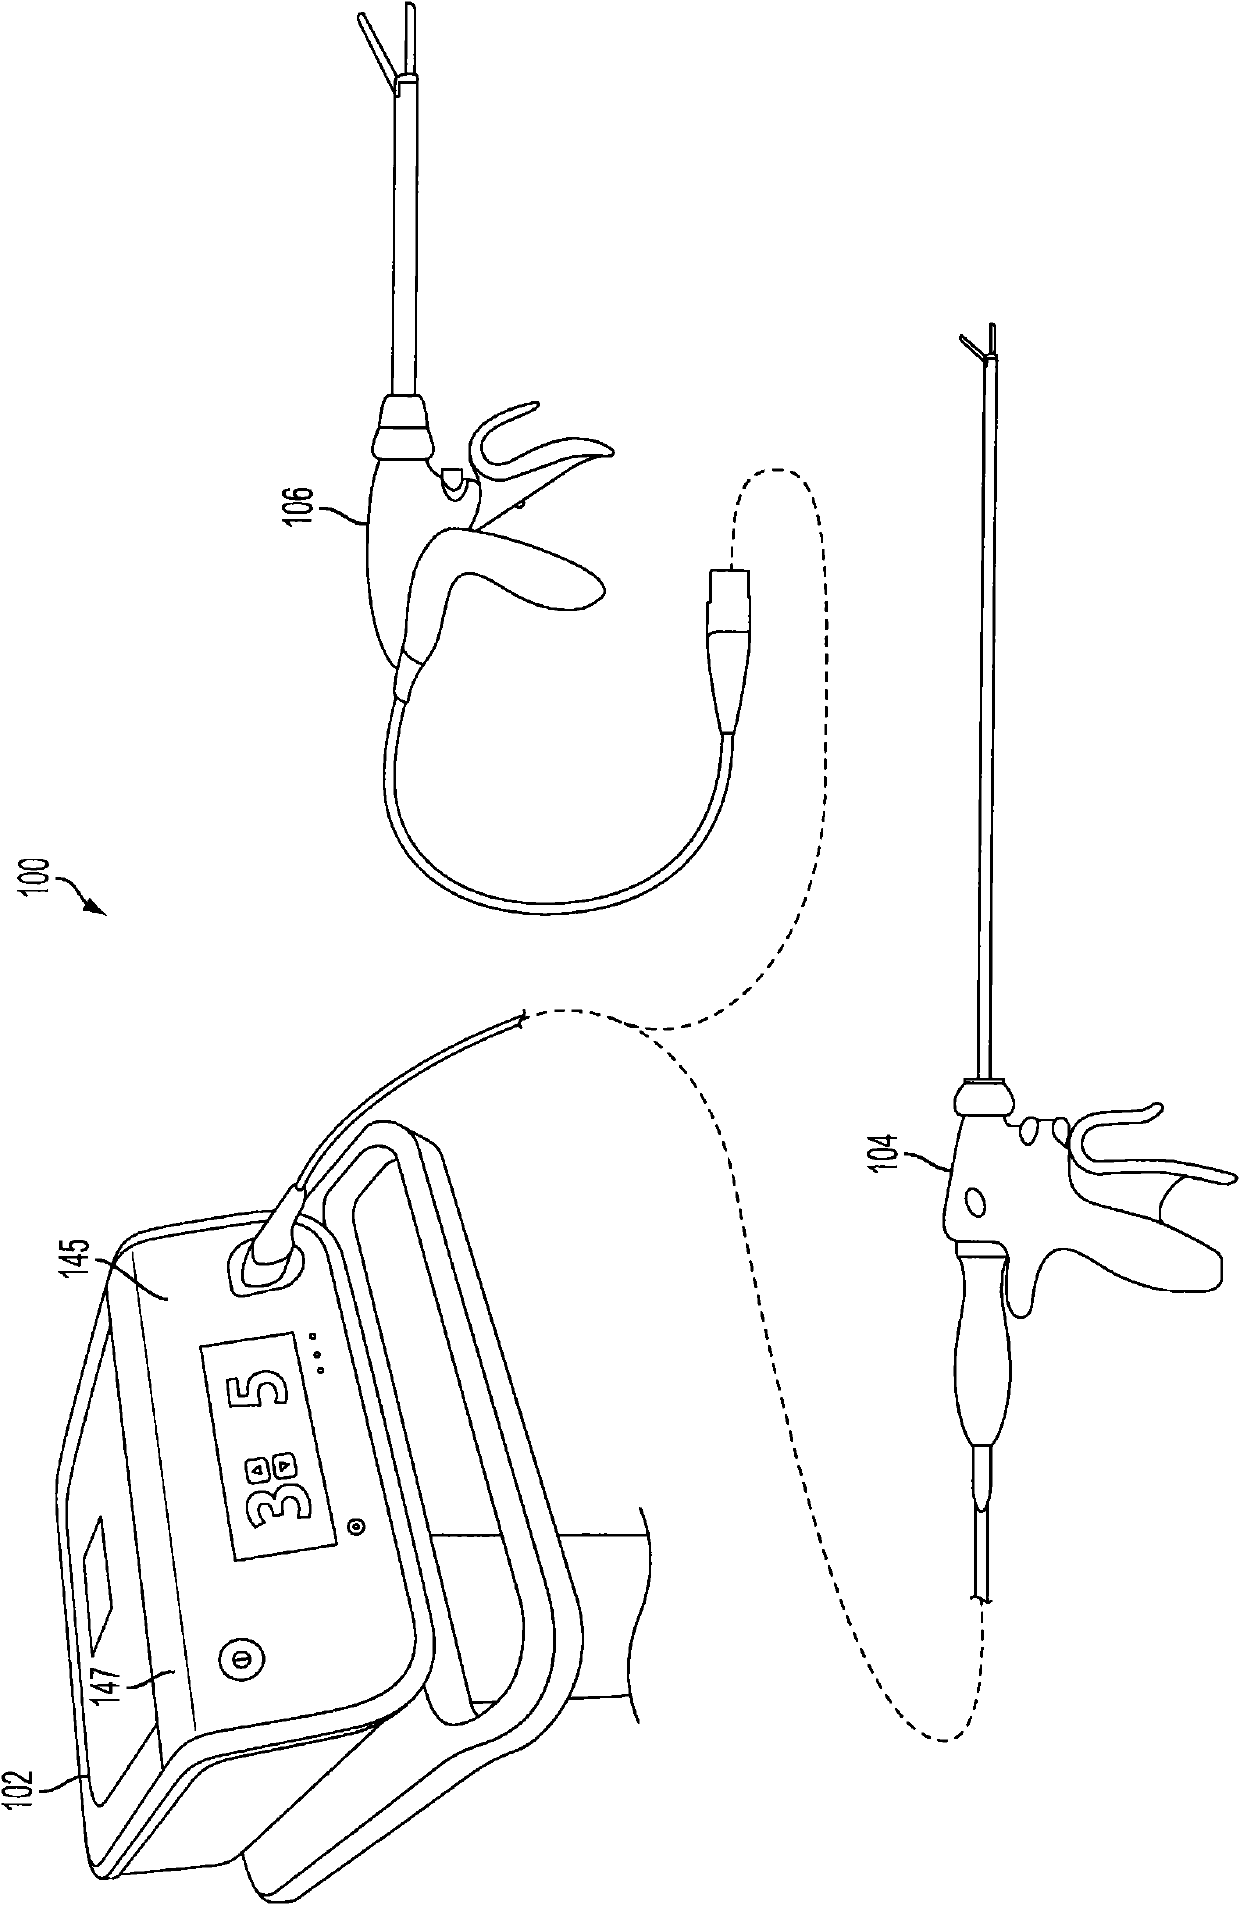 Surgical generator for ultrasonic and electrosurgical devices